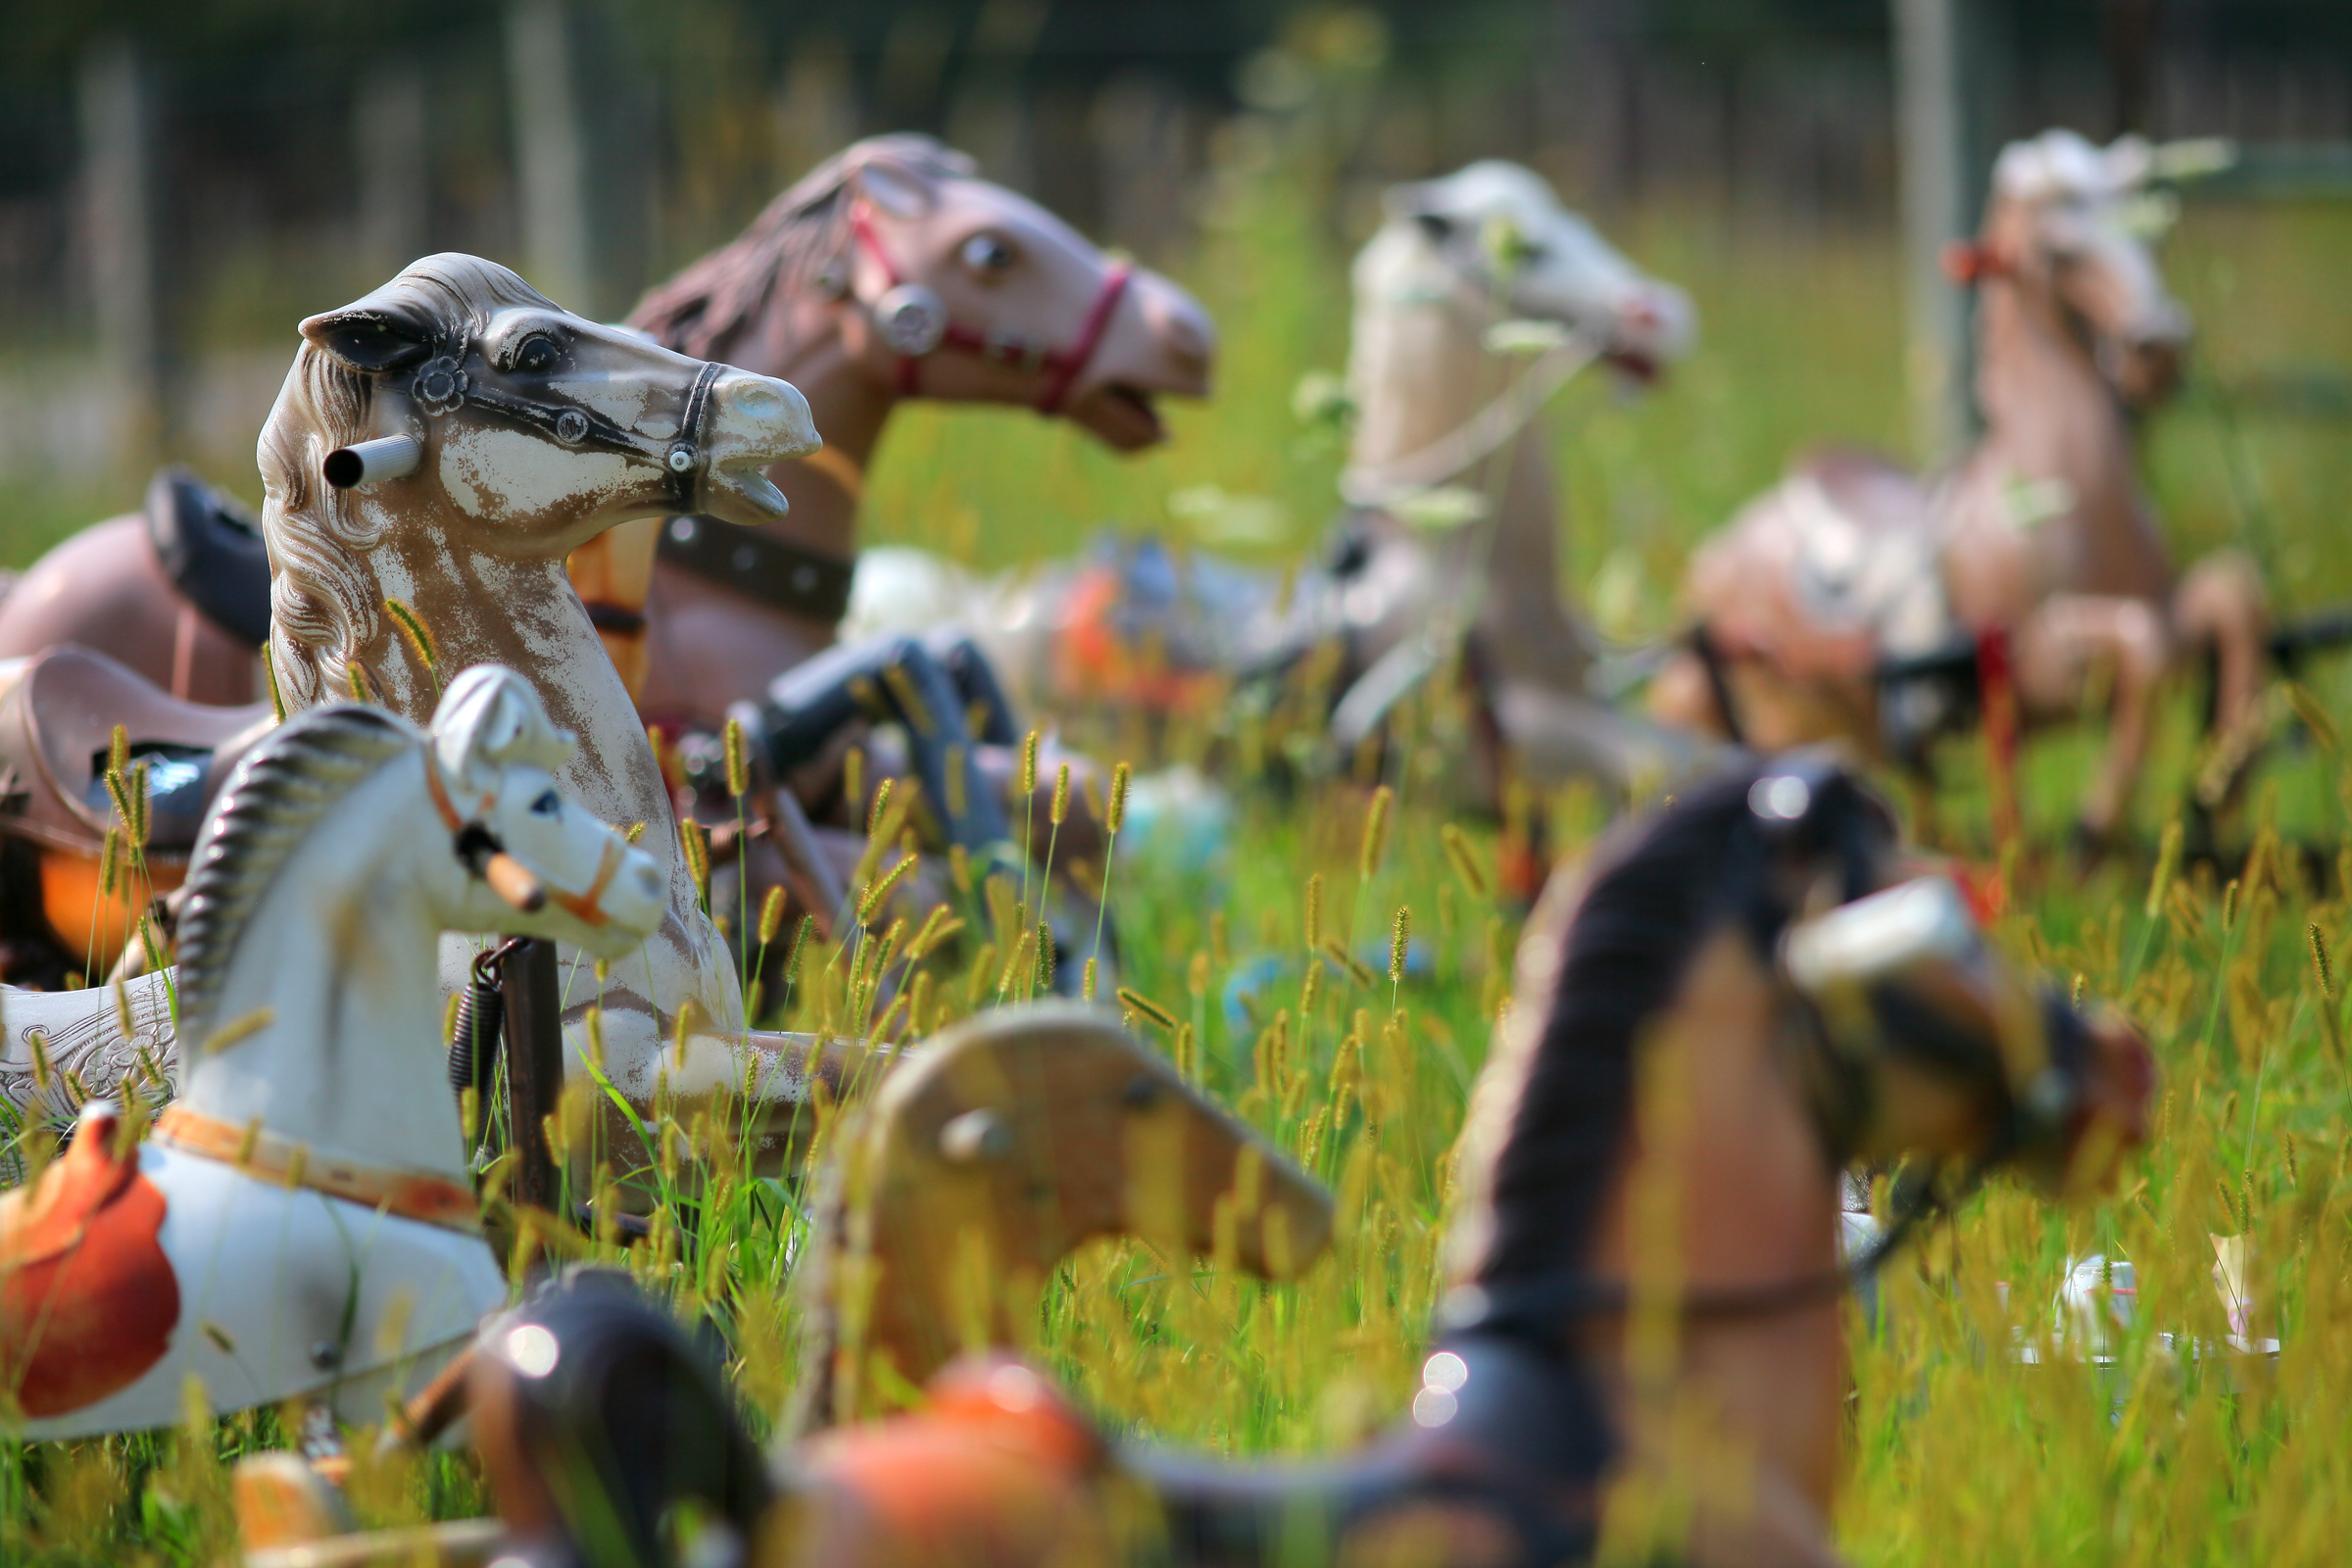 Www Horse Duck Girl Com - Ponyhenge: The absurd, haunting, anonymous communal art project in my field